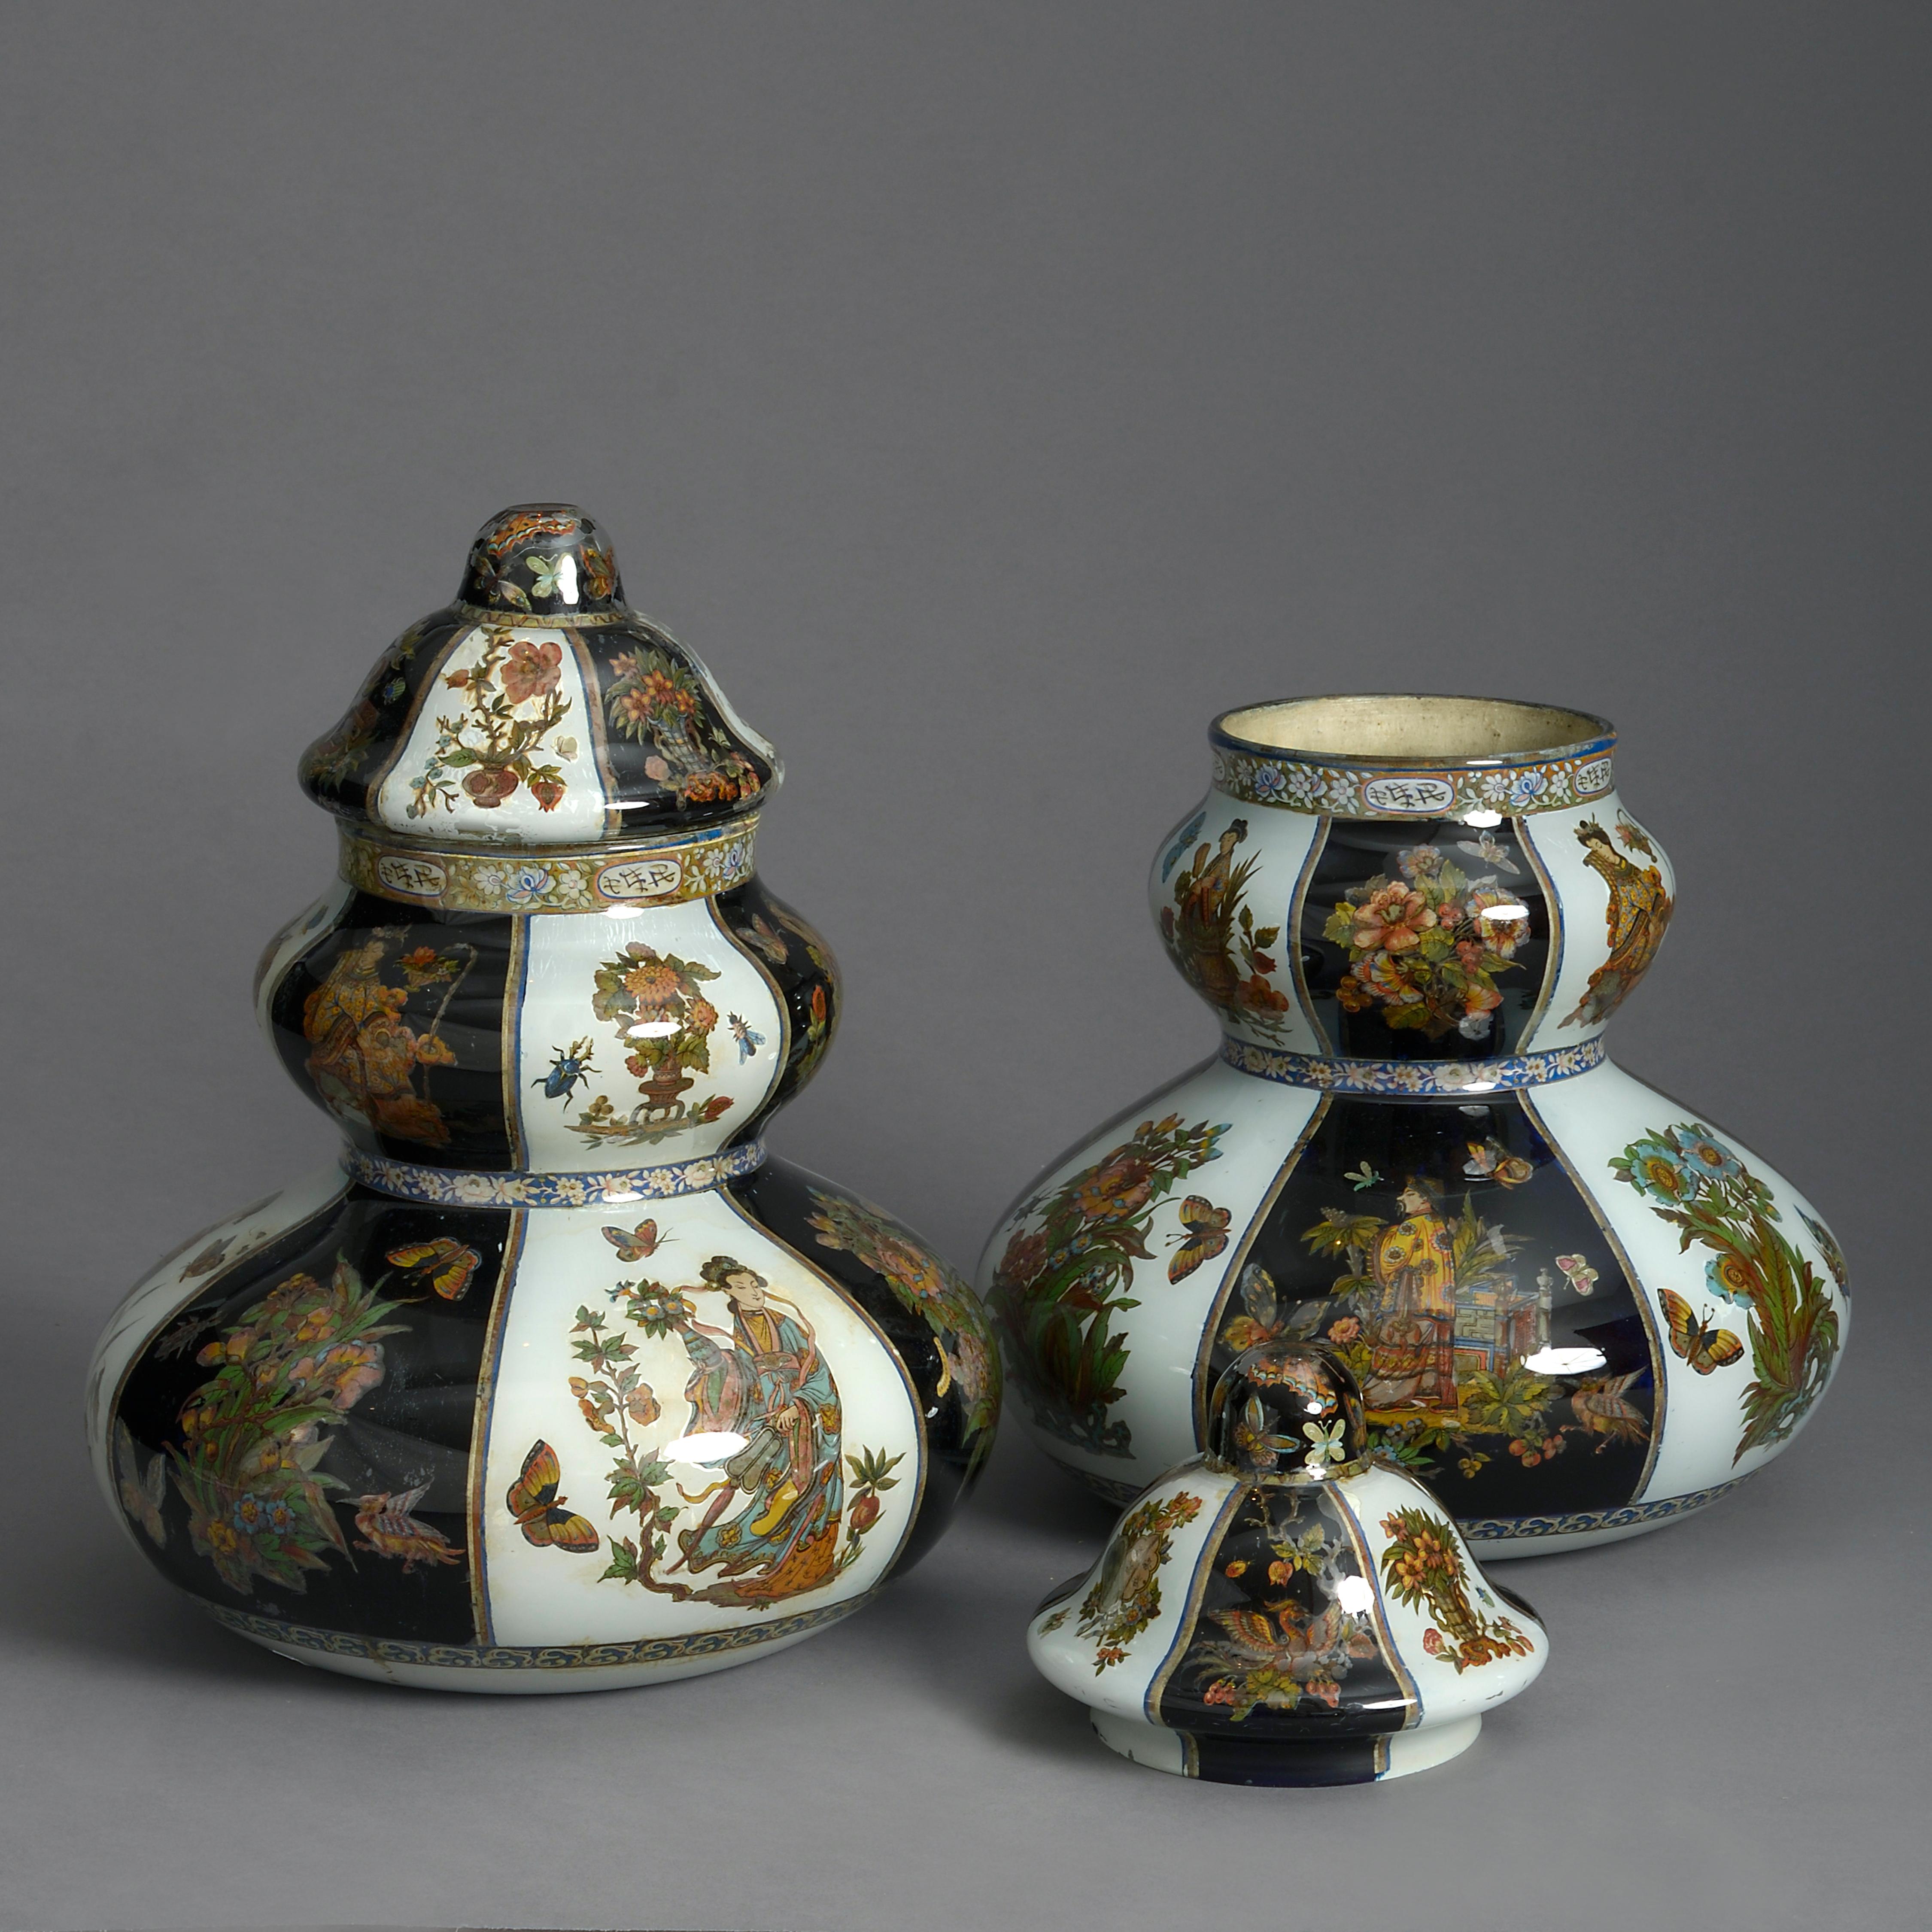 A fine and most unusual 19th century pair of gourd shaped lidded glass decalcomania vases, internally decorated with hand-colored chinoiseries upon a striped blue and white ground.